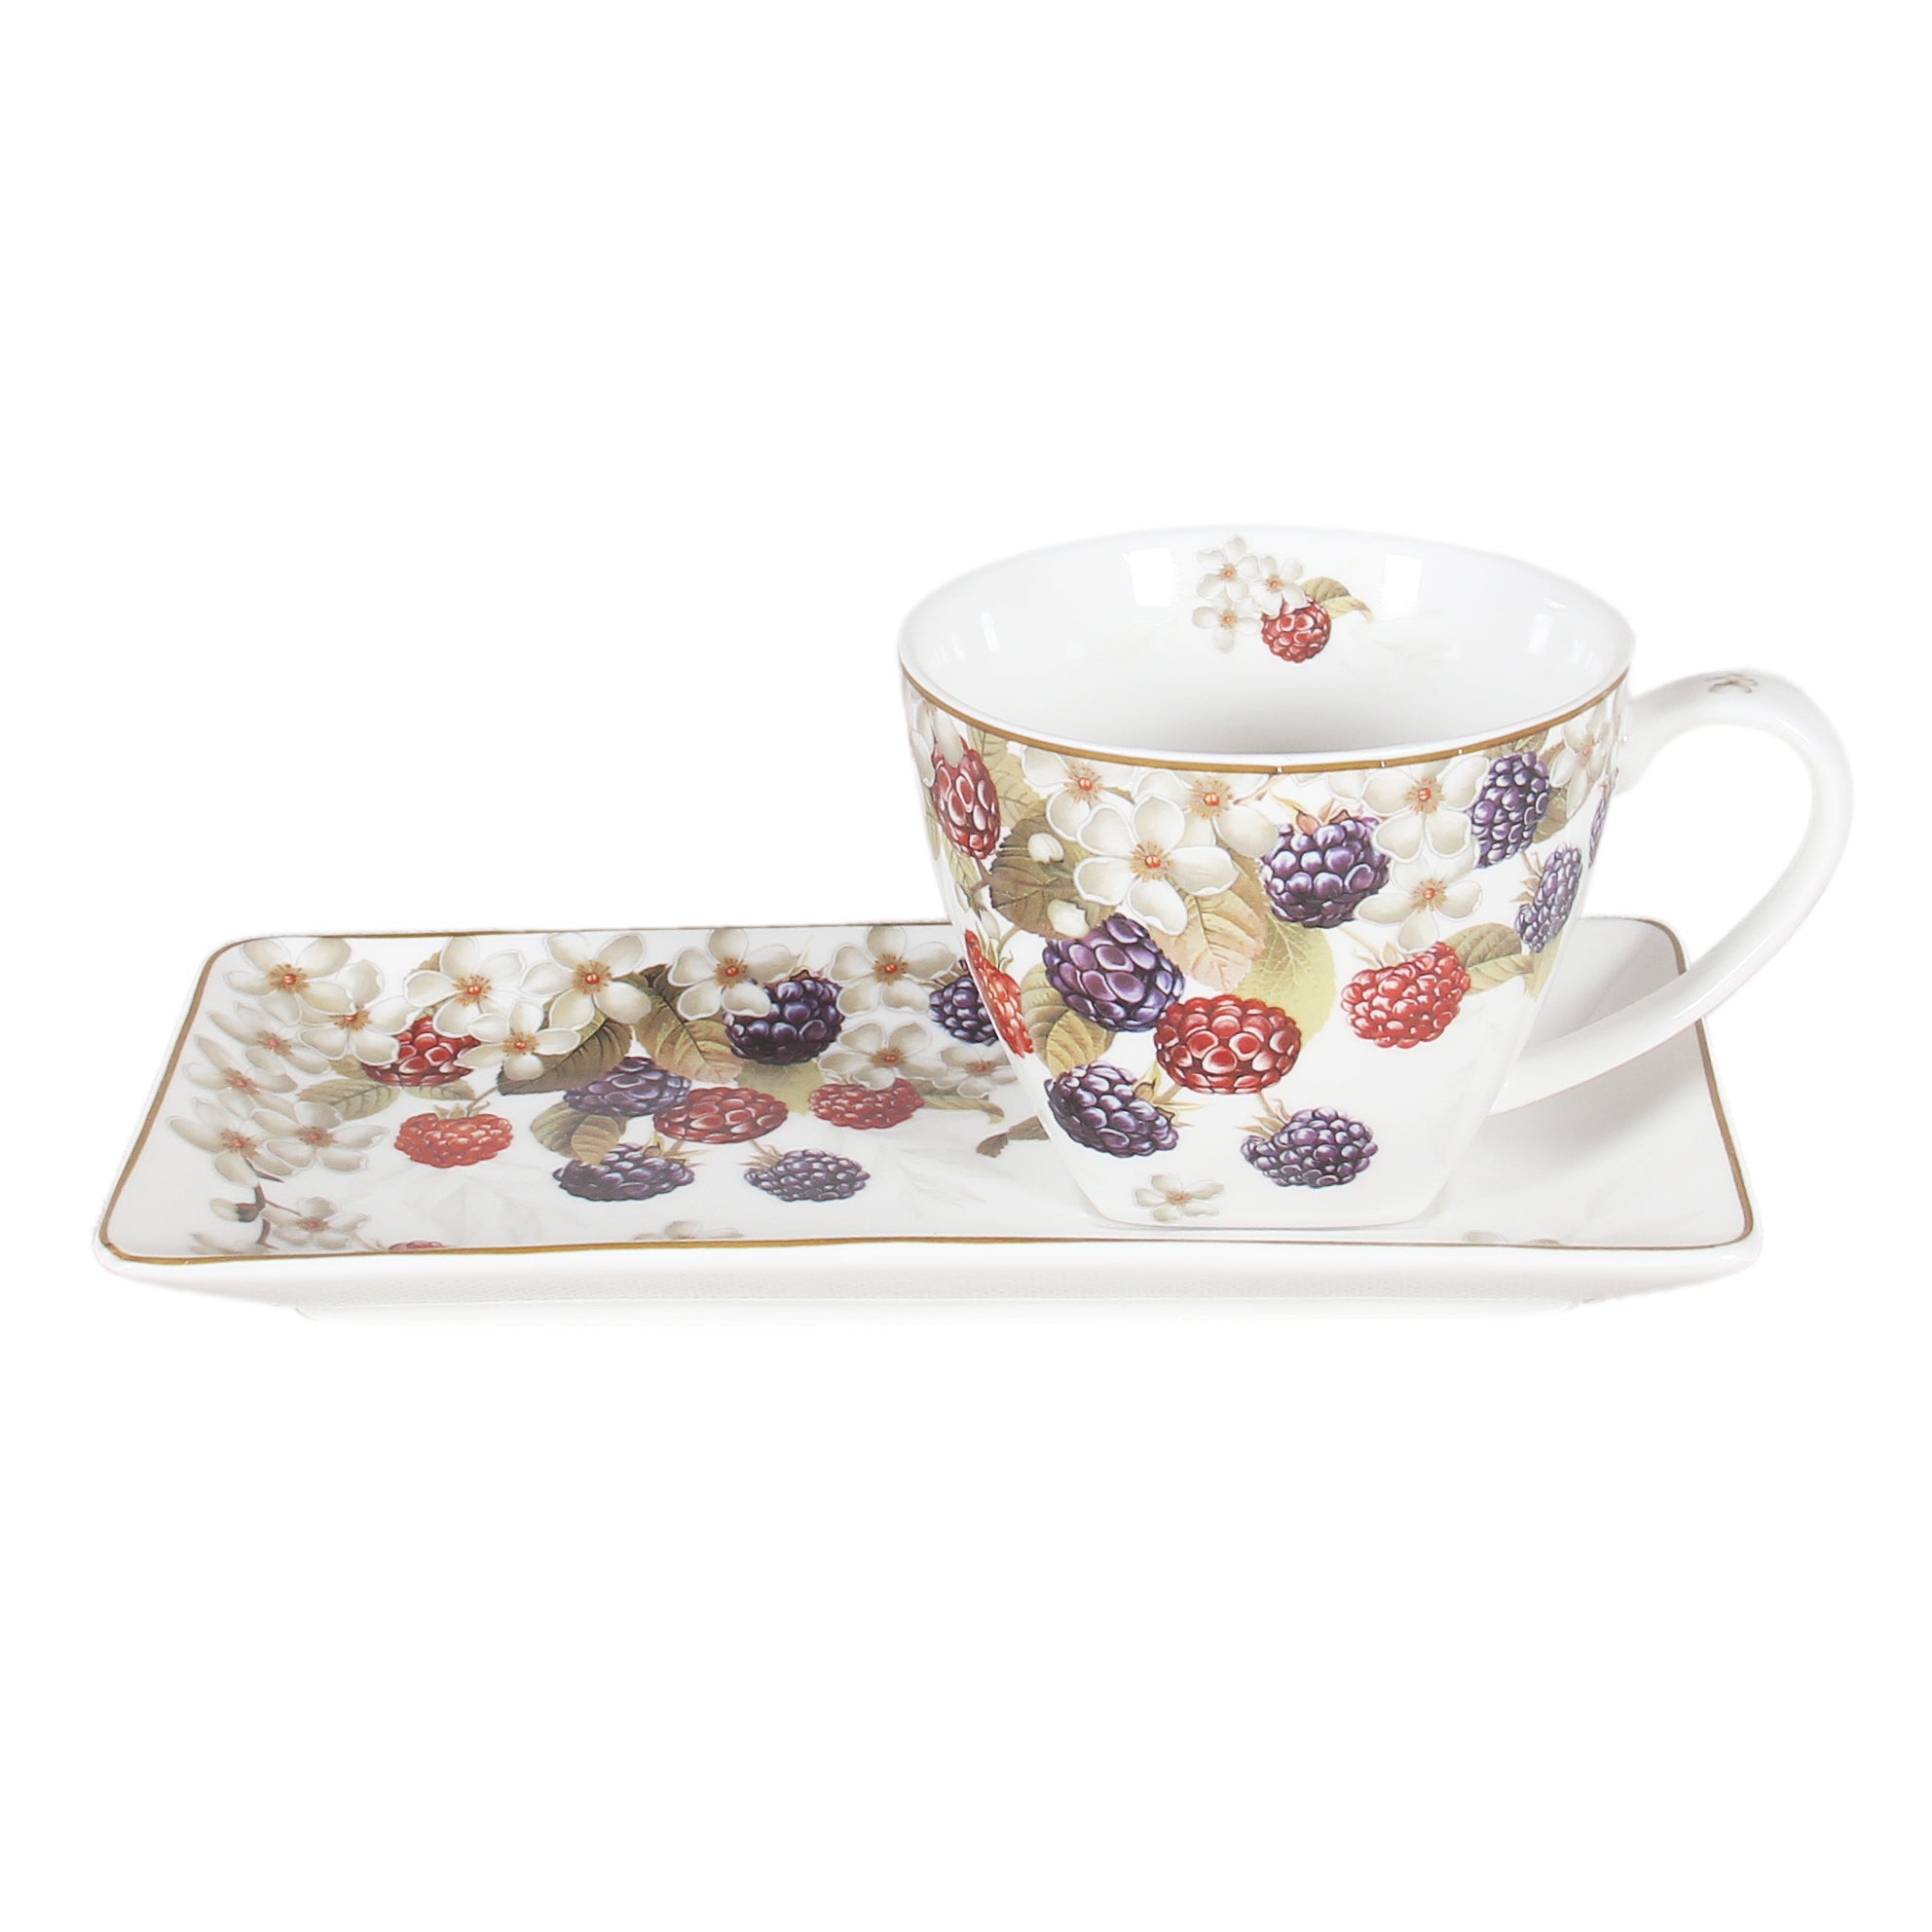 Wild Berry on Fine Bone China Cup and Saucer Breakfast Set - 250ml Gift Box - Dollars and Sense